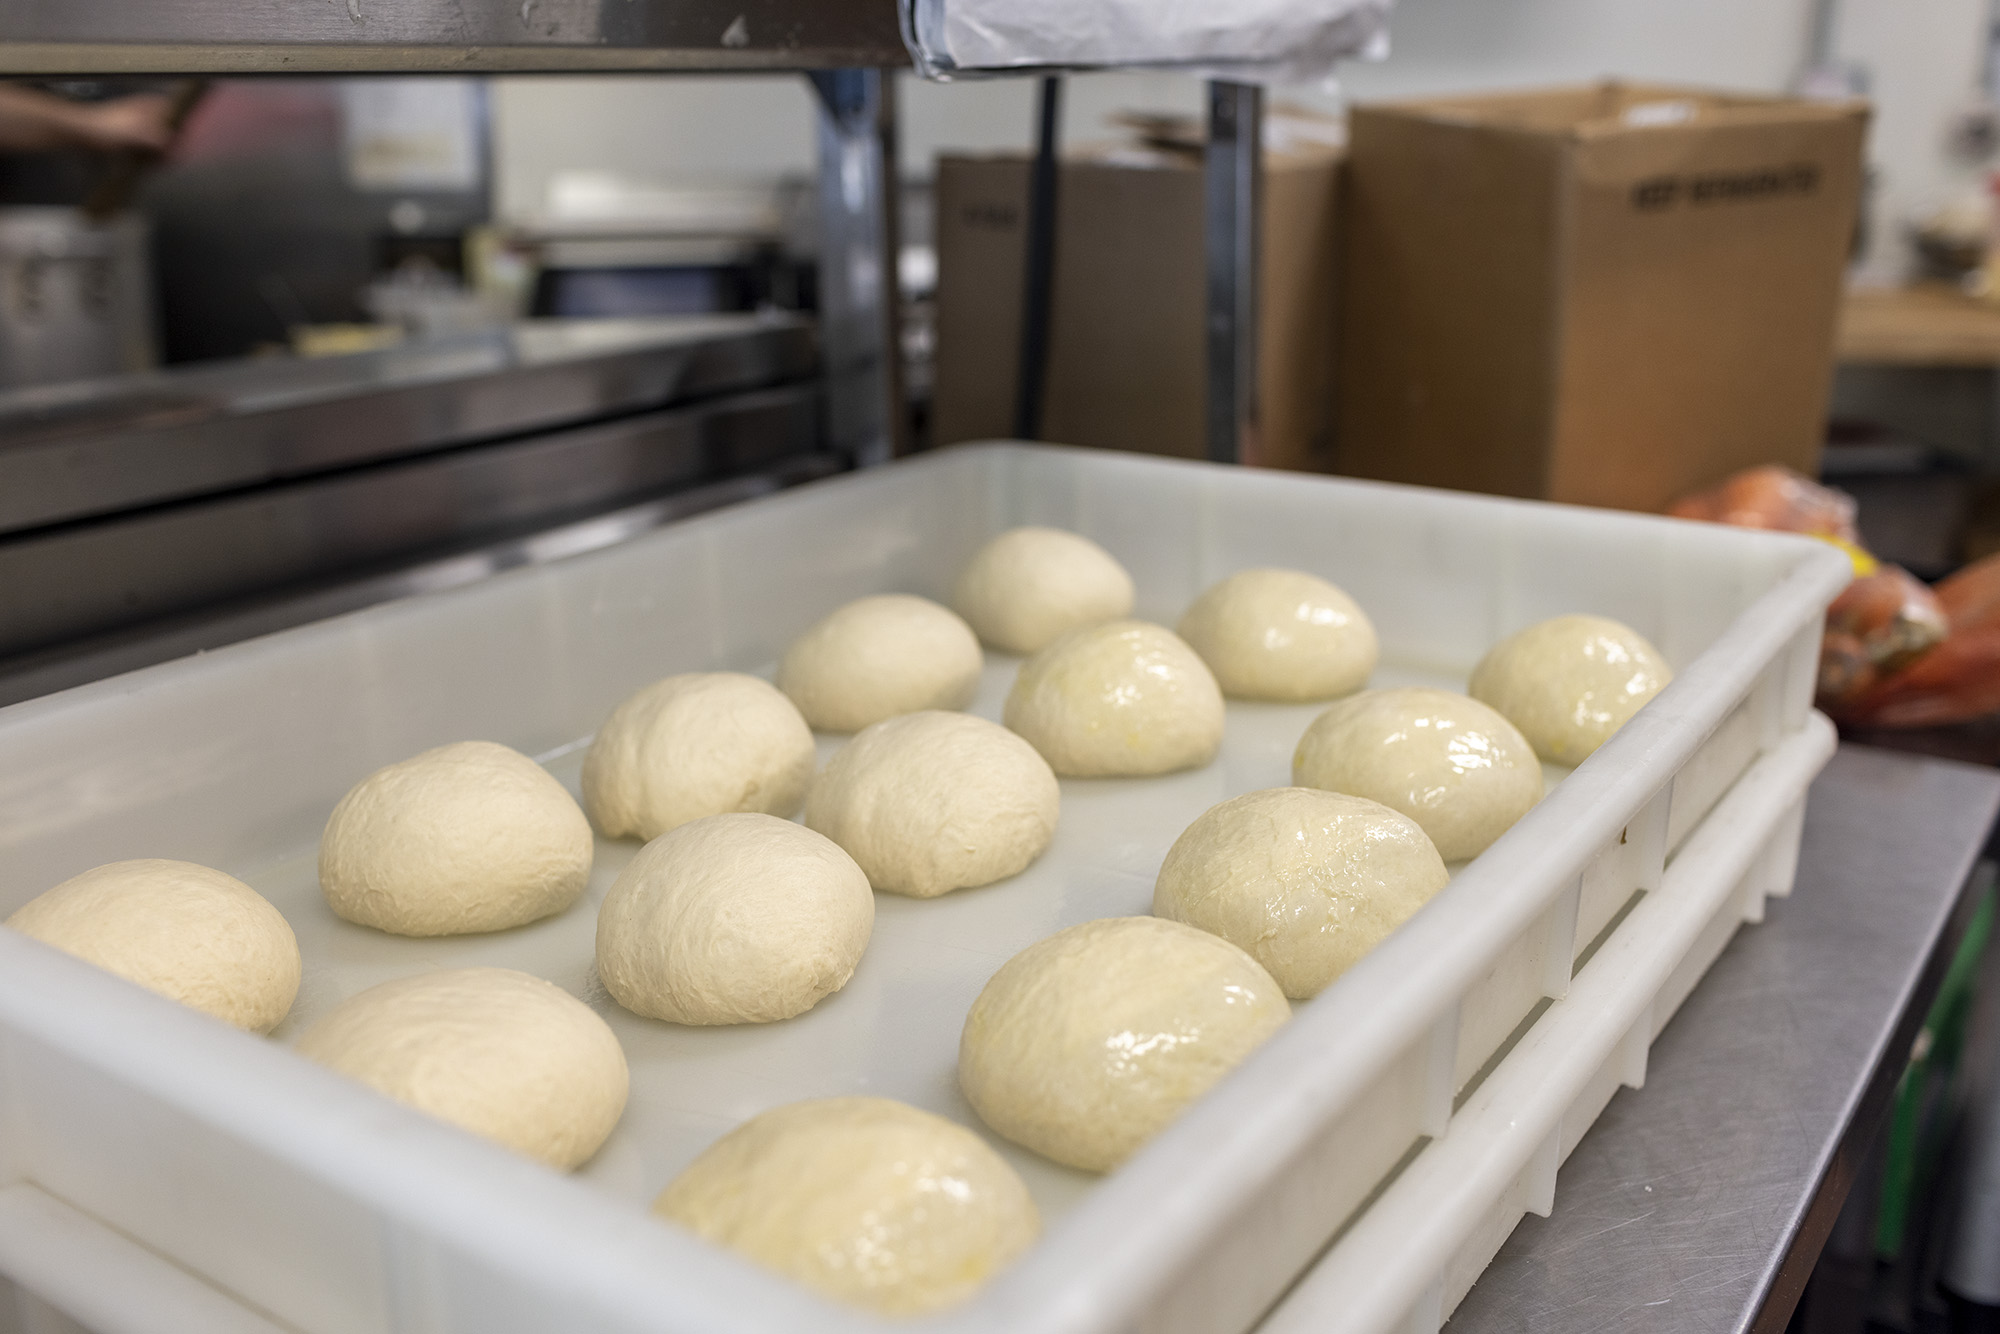 Fresh pizza dough at Penngrove Market waiting to be rolled out.